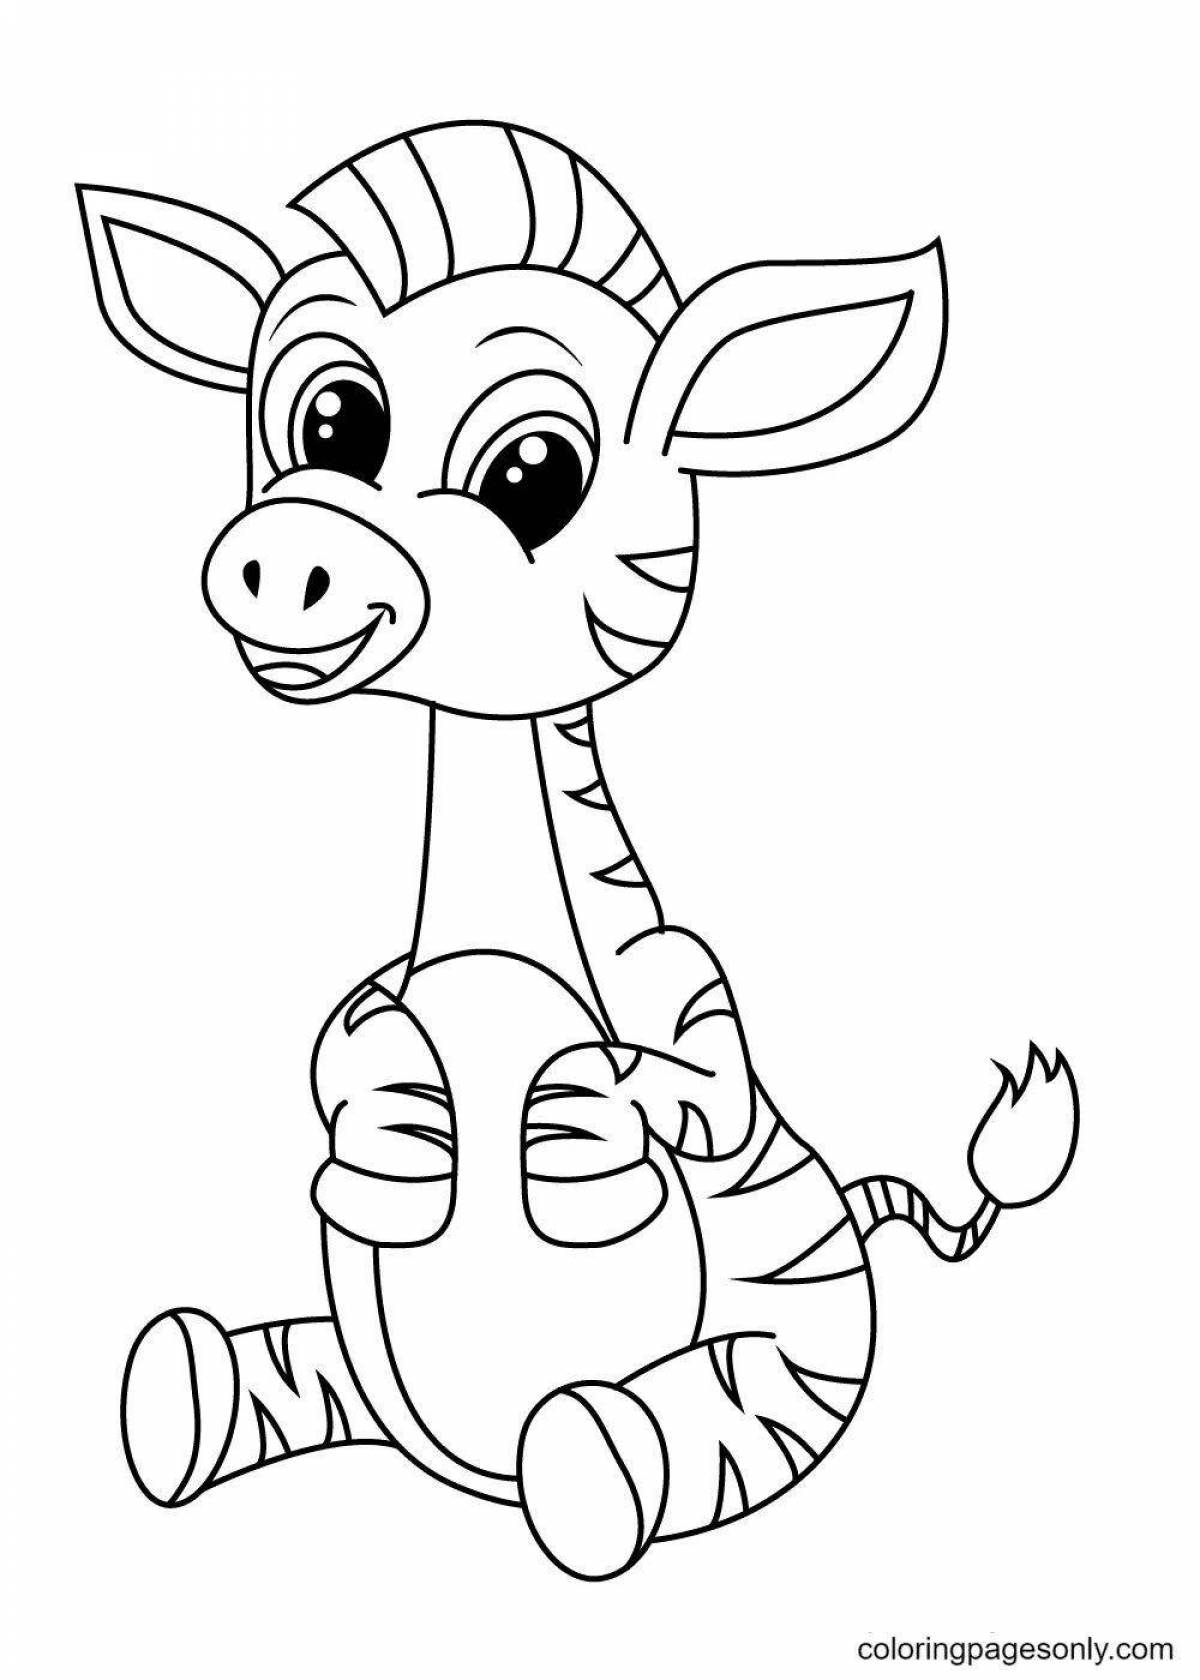 Amazing zebra coloring book for 3-4 year olds